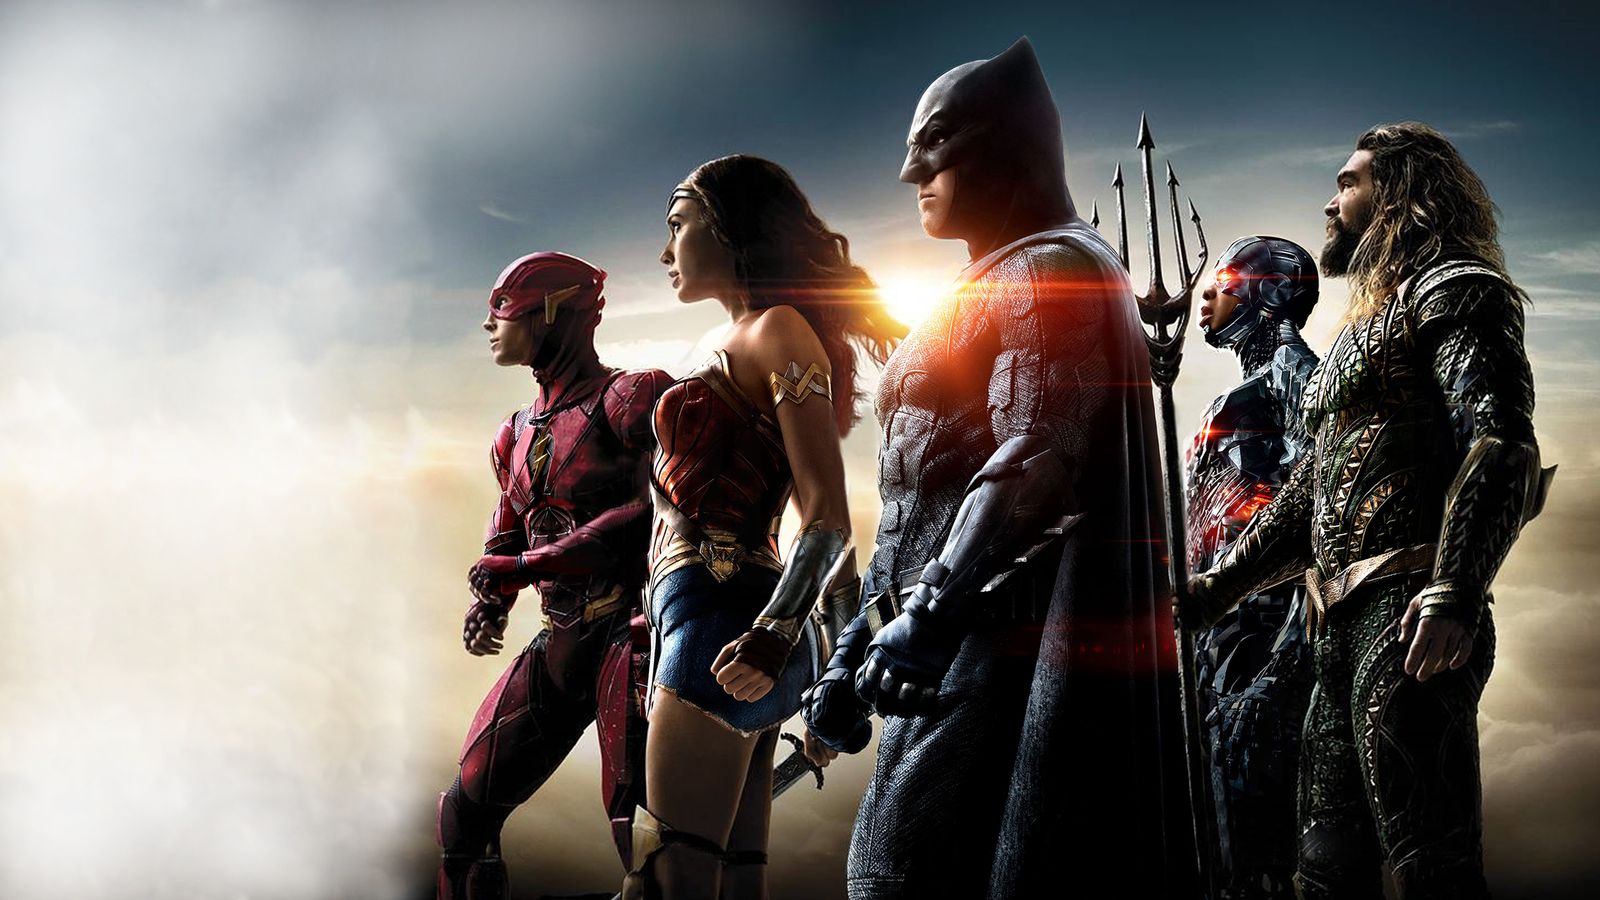 Ben Affleck Reveals Zack Snyder's Role In The Making Of 'Justice League'